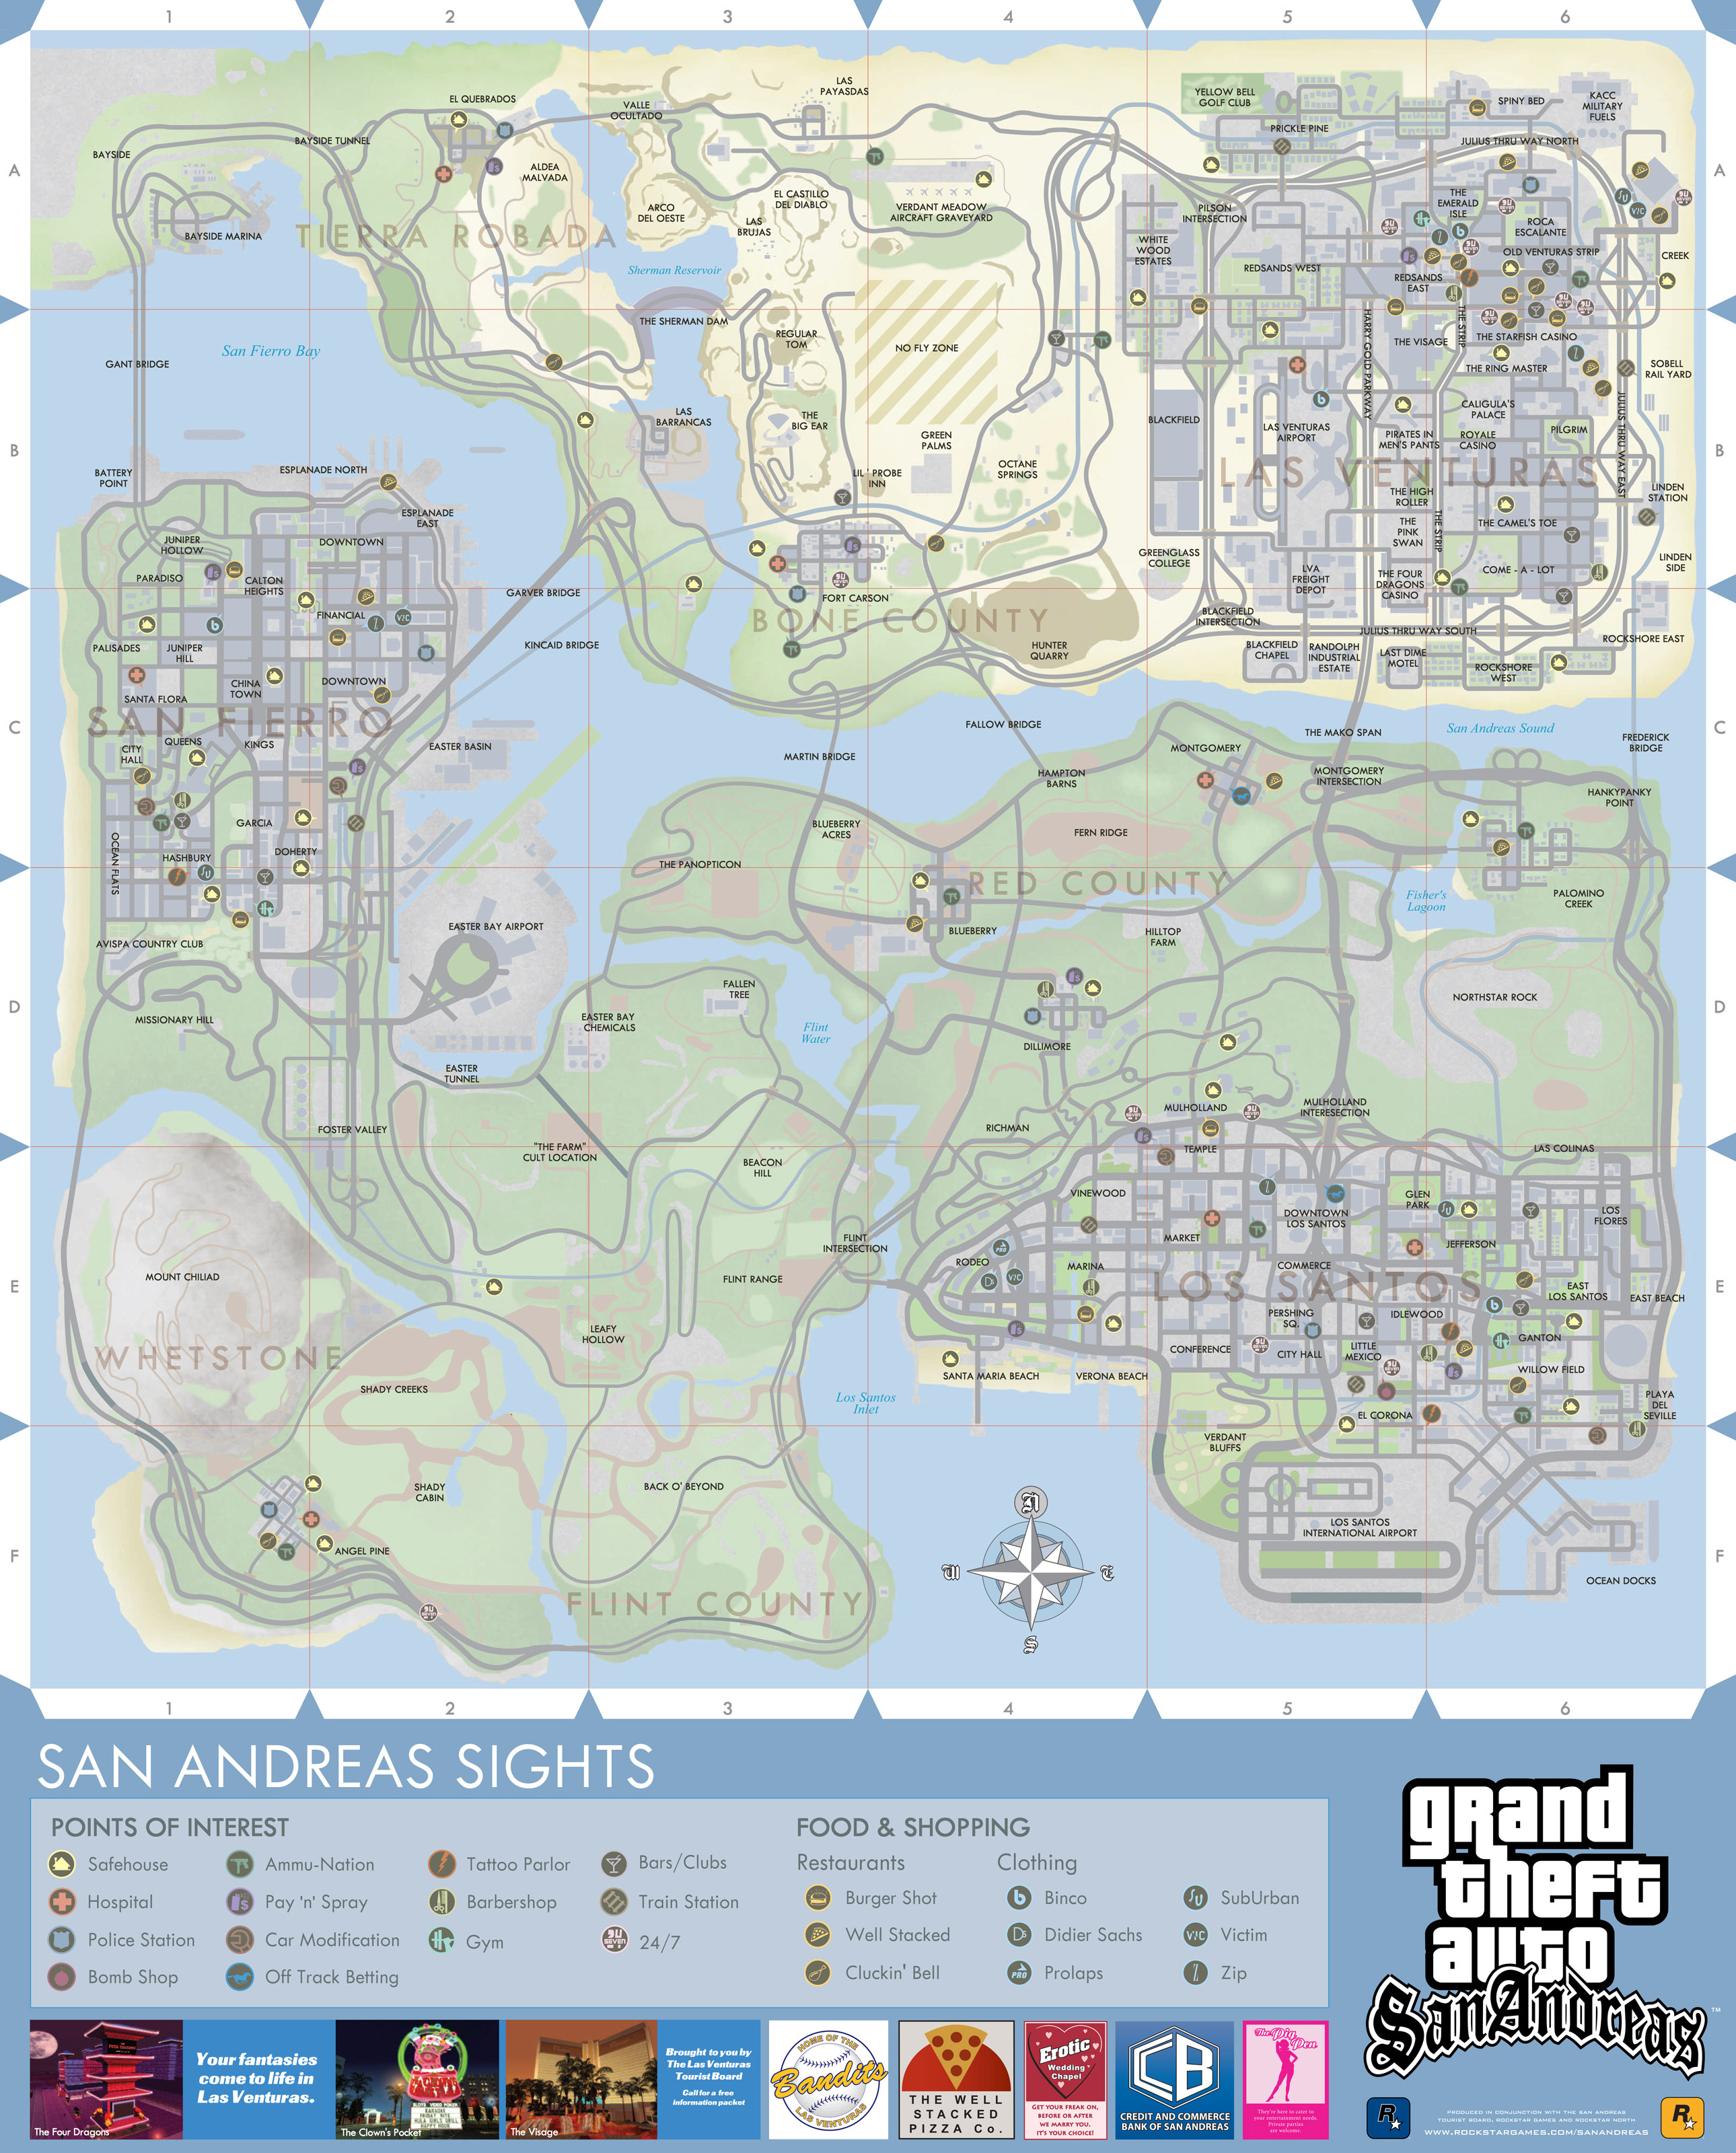 Updated Map of GTA:San Andreas With Real Life Locations (Included